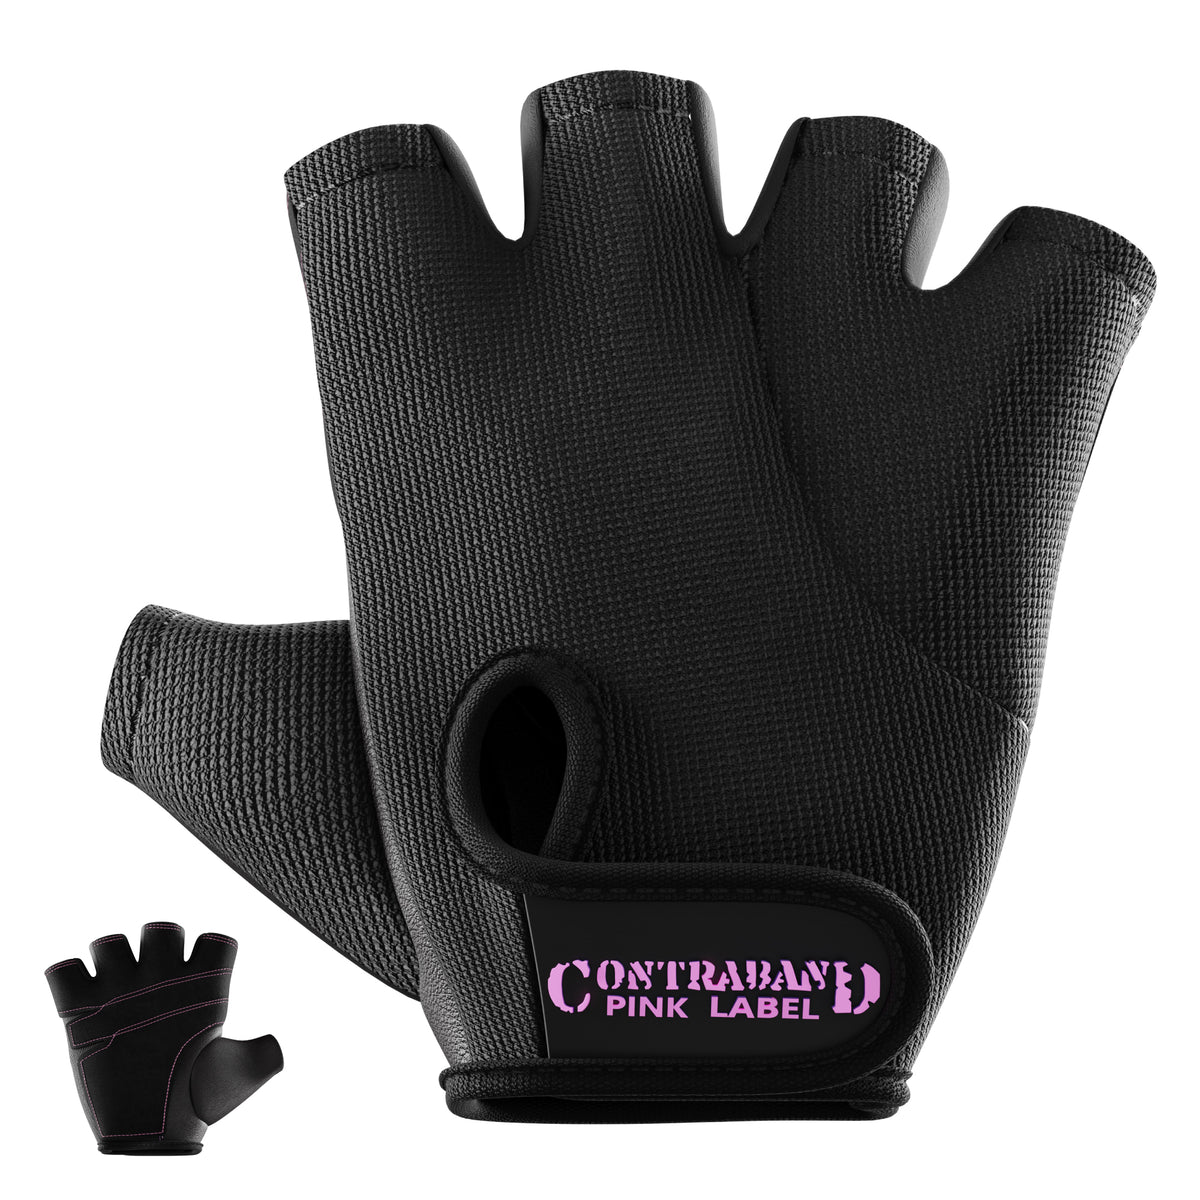 Contraband Pink Label 5057 Womens Basic Lifting Gloves (Pair)